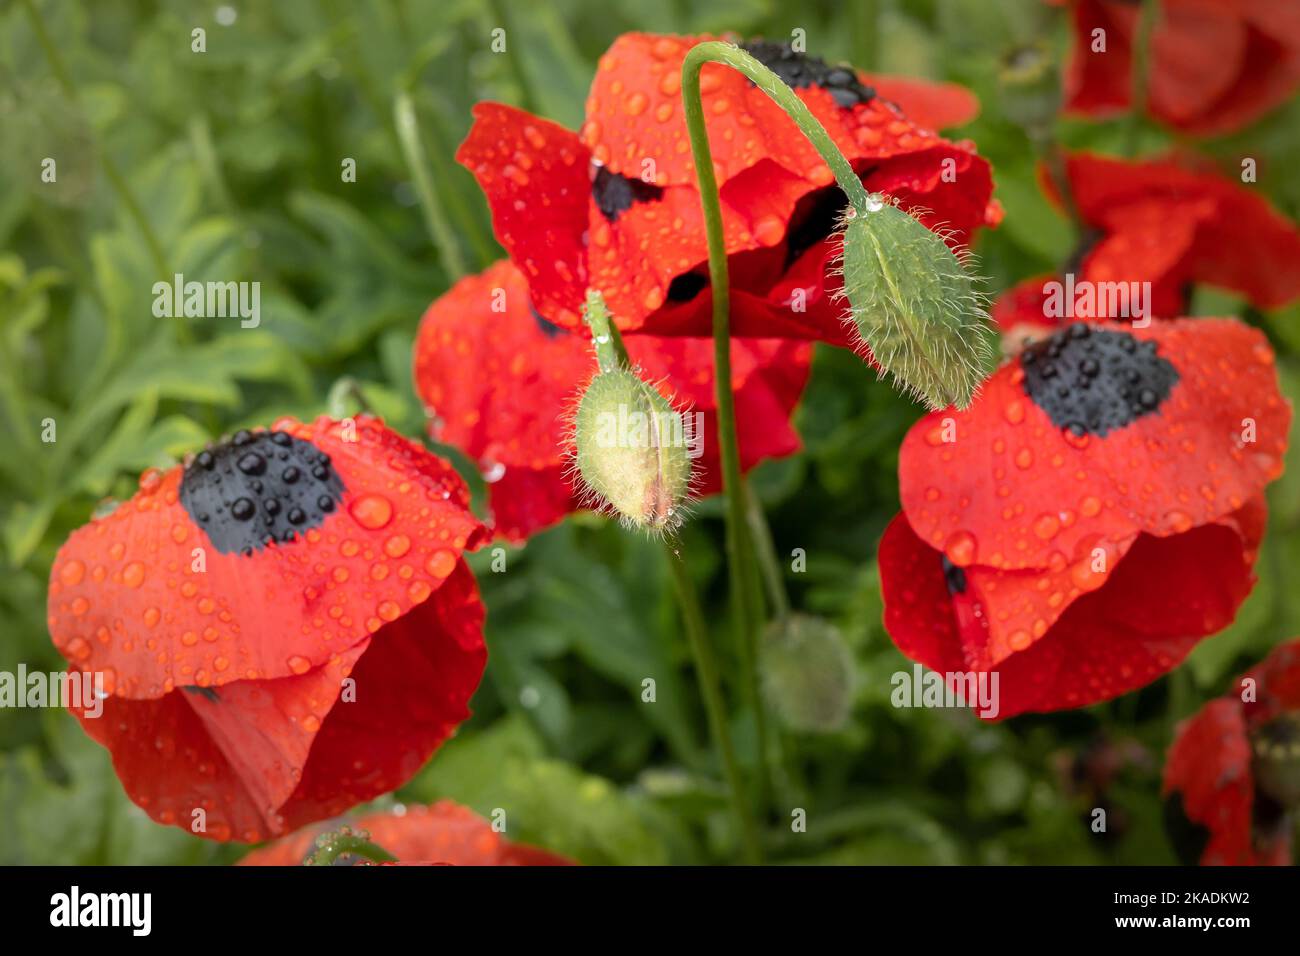 Red poppy flowers with black spots (Papaver commutatum 'Ladybird') wet after rain, blooming in the garden. Stock Photo